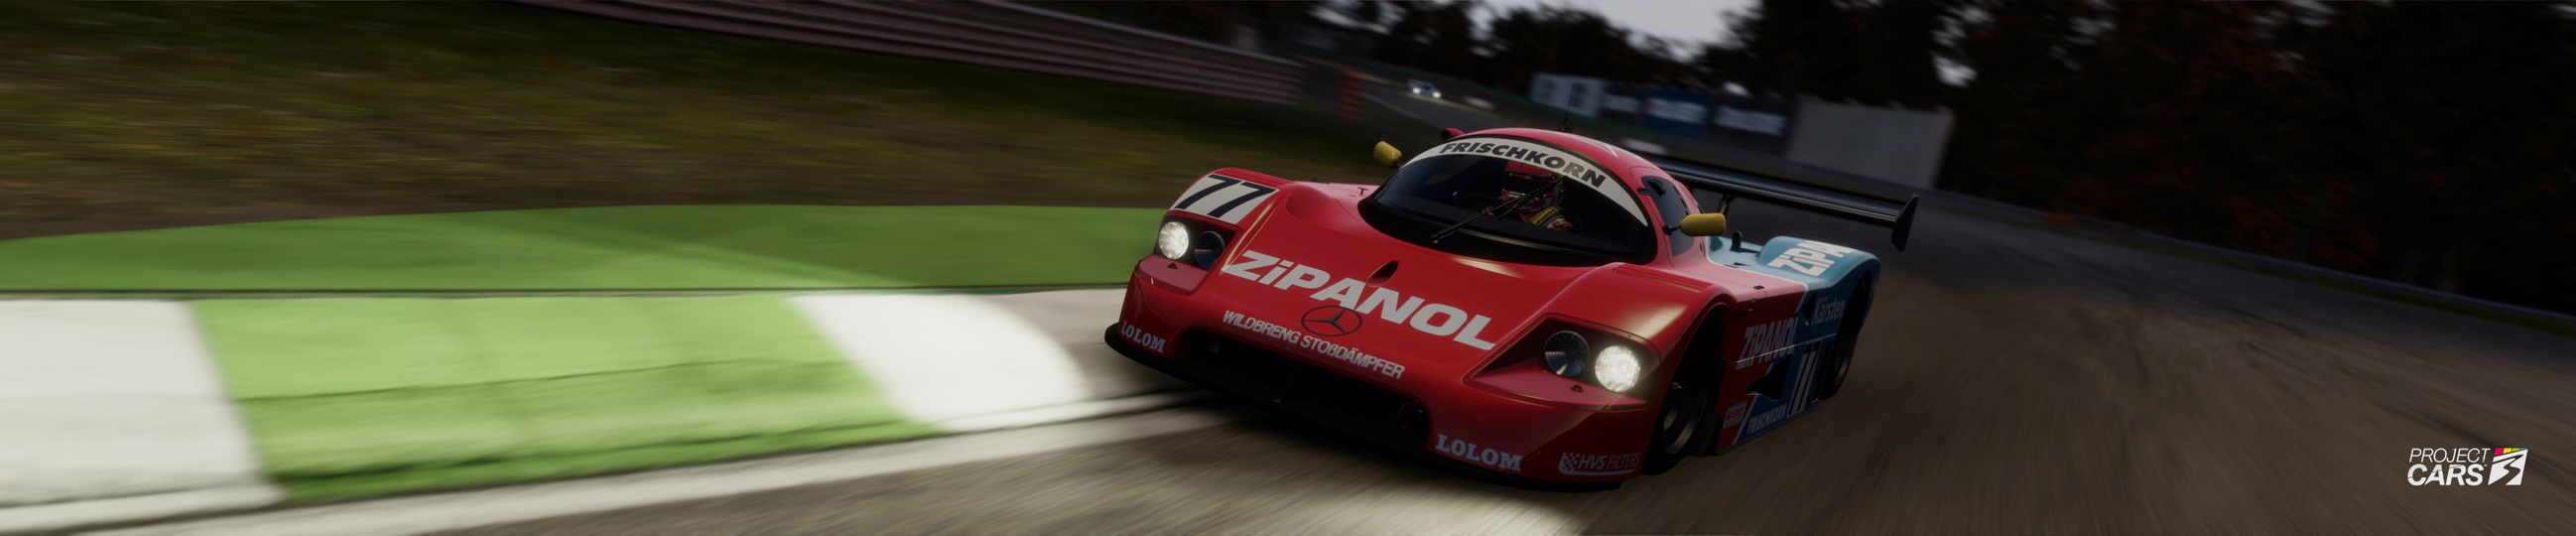 0a PROJECT CARS GROUP C at MONZA crop copy.jpg